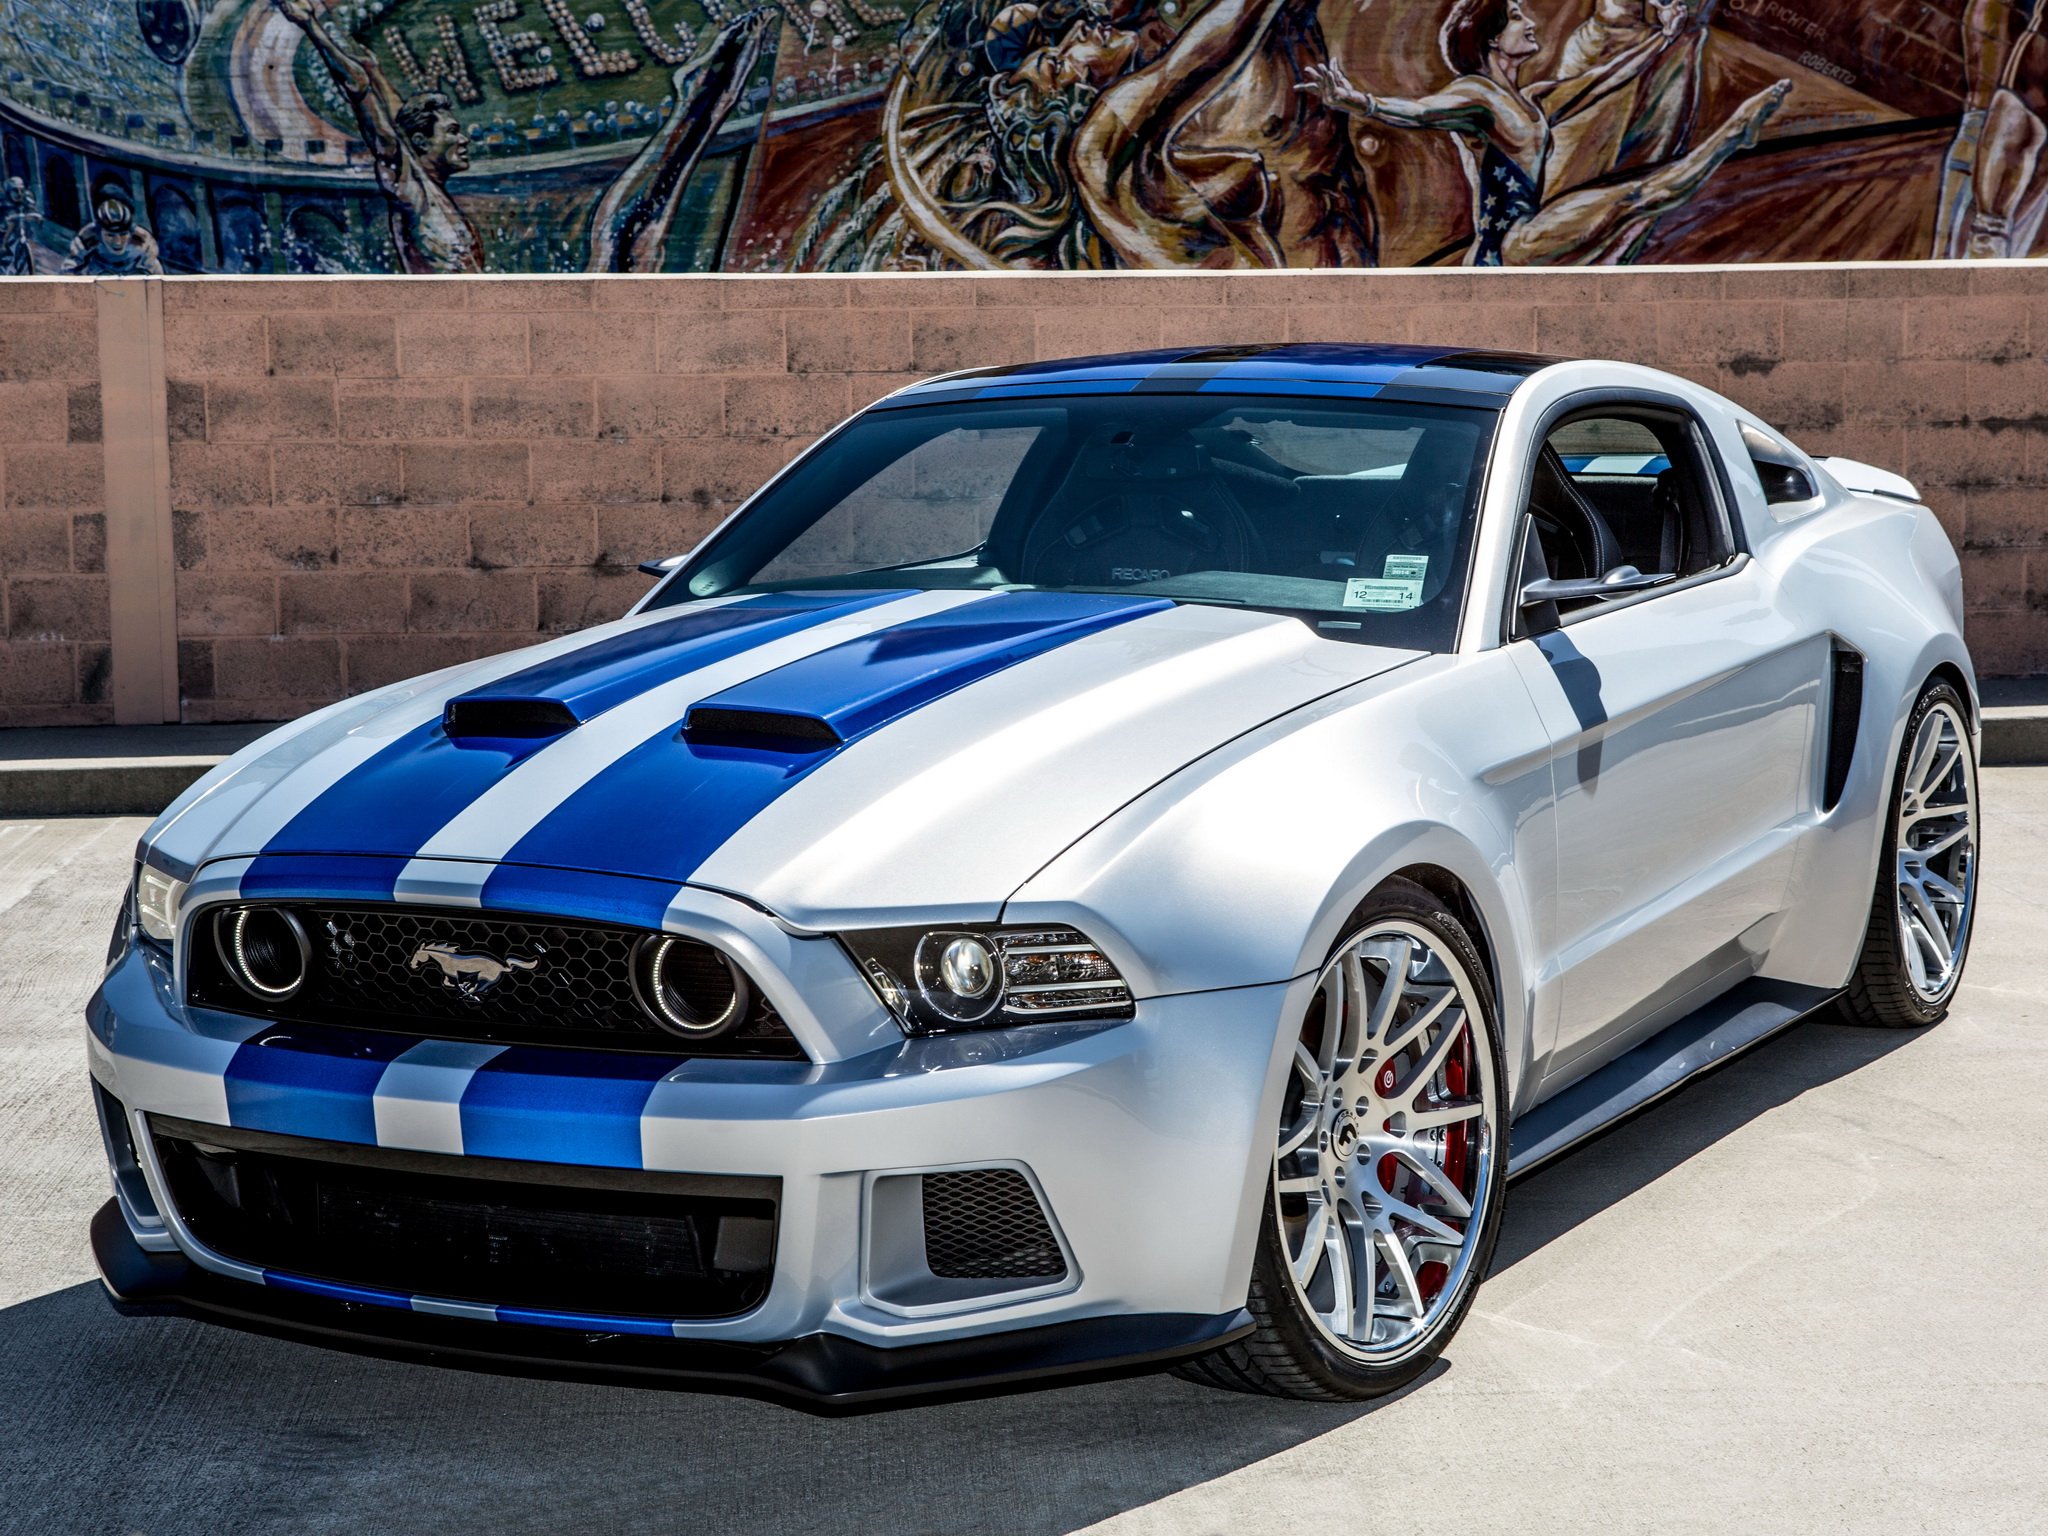 2014, Ford, Mustang, G t, Need, For, Speed, Movoe, Film, Supercar, Muscle, Hot, Rod, Rods, Tuning, Gh Wallpaper